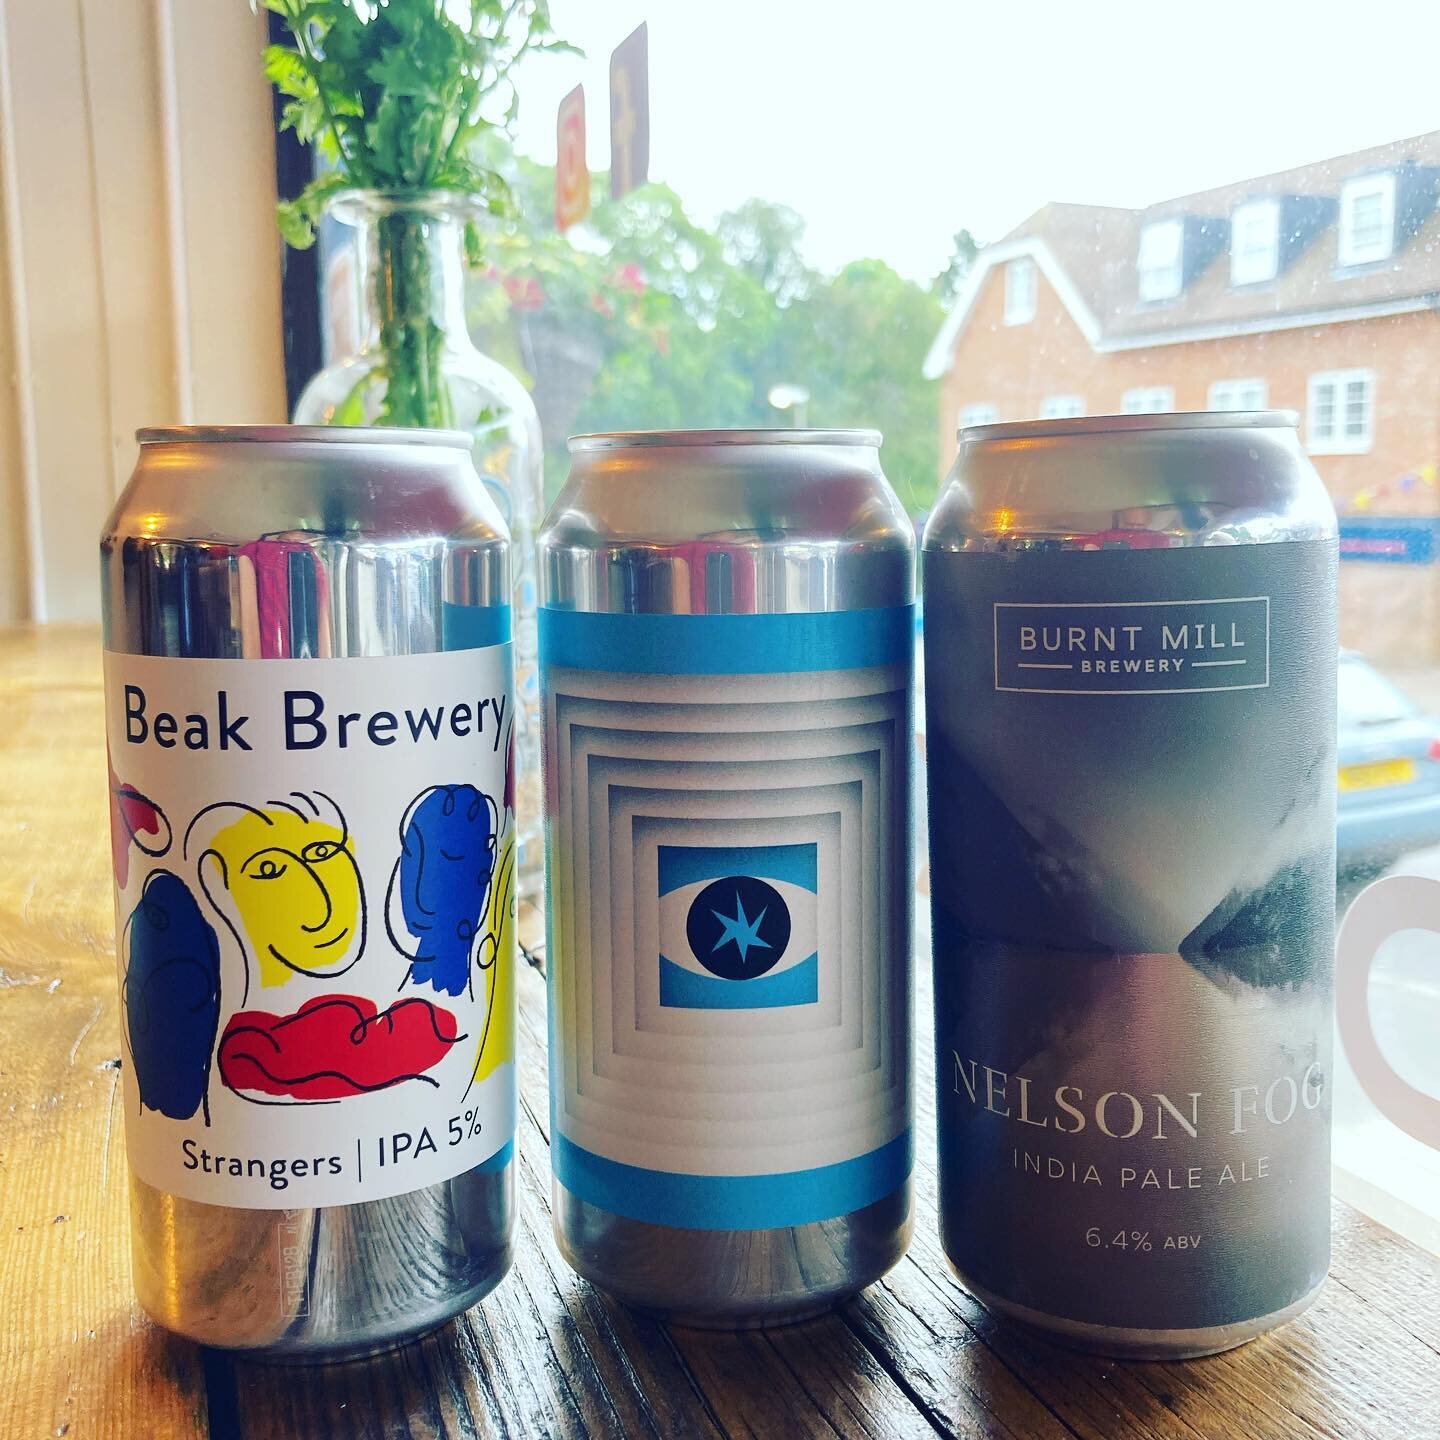 Fresh stock in the fridge today @wildkitebottleshop 

Beak &lsquo;Strangers&rsquo; IPA 5%  @thebeakbrewery 

Verdant&lsquo;Invisible Ceilings&rsquo; Pale Ale 4.7%  @verdantbrew 

Burnt Mill &lsquo;Nelson Fog&rsquo; IPA 6.4%  @burntmillbrewery 

Aweso